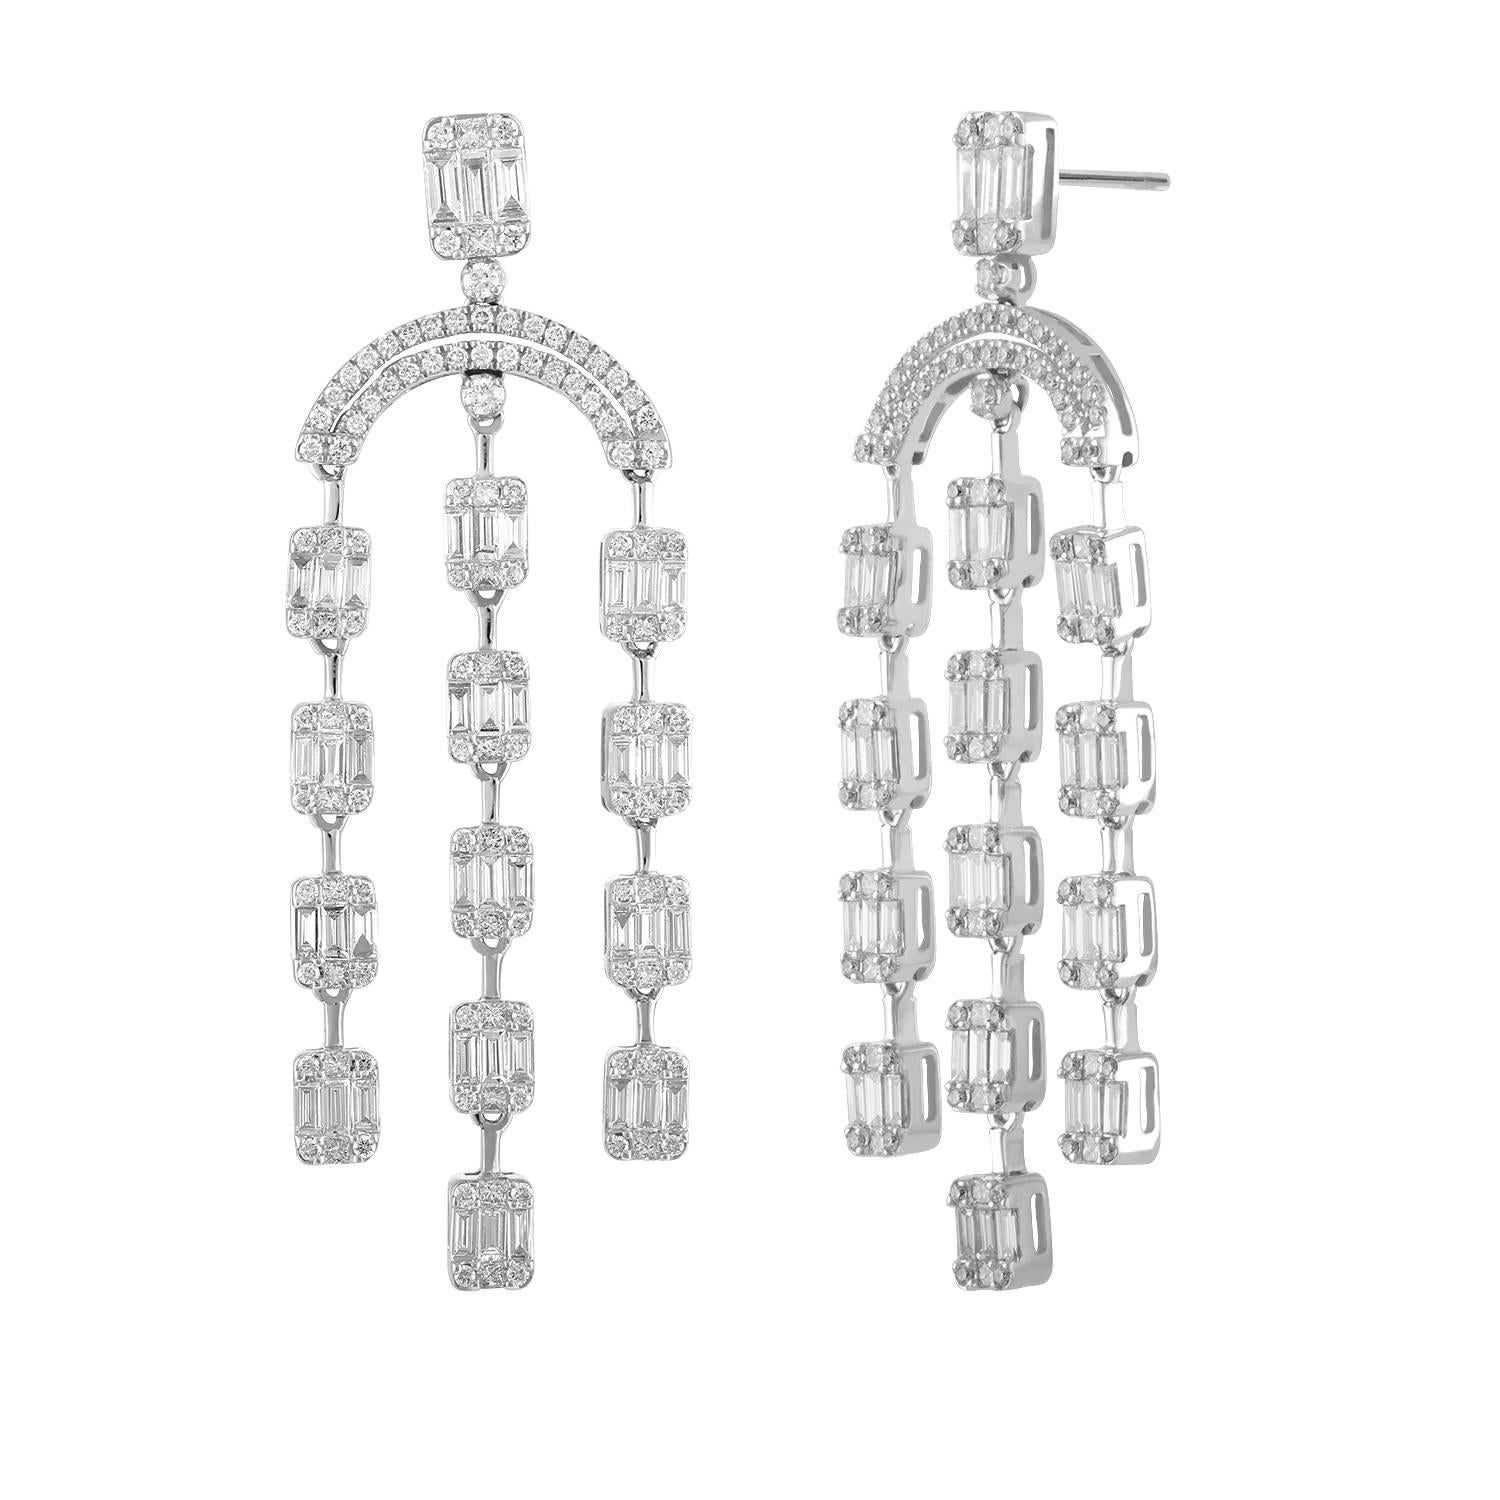 Contemporary 18 Karat White Gold Chandelier Earrings with Round Brilliants and Baguettes